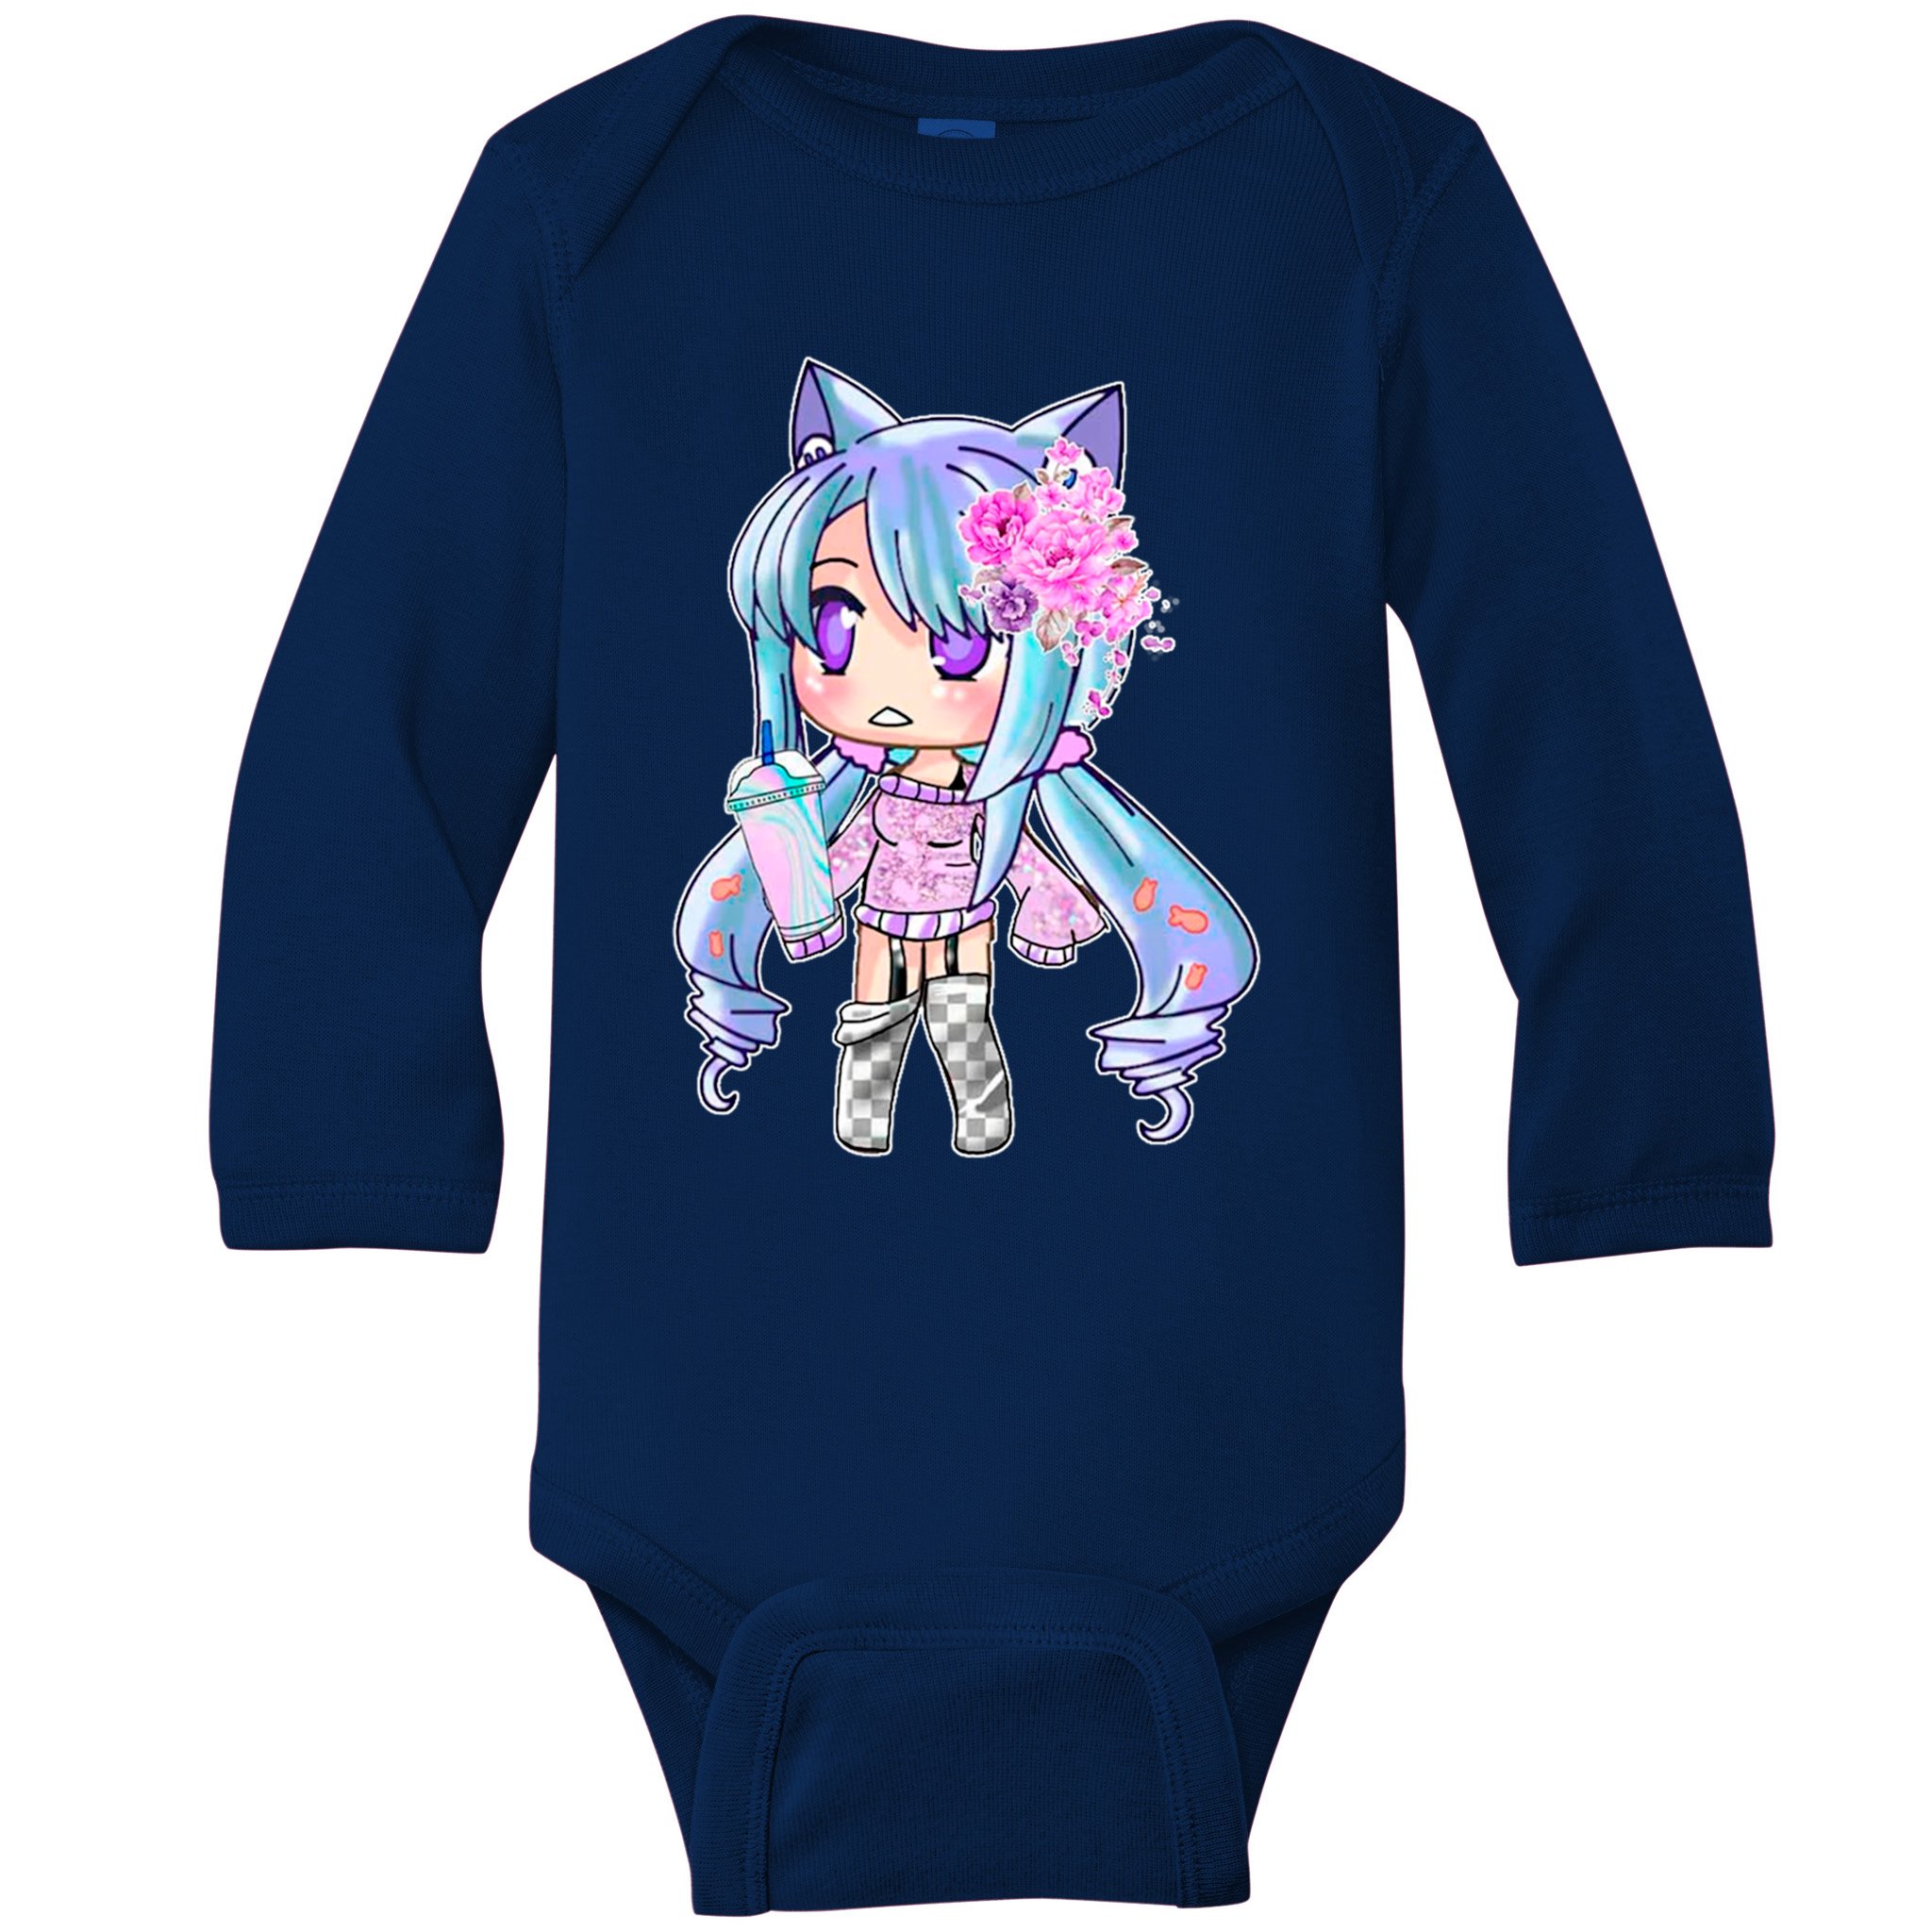 Gachalife outfits  Clothing sketches, Baby animals funny, Anime outfits